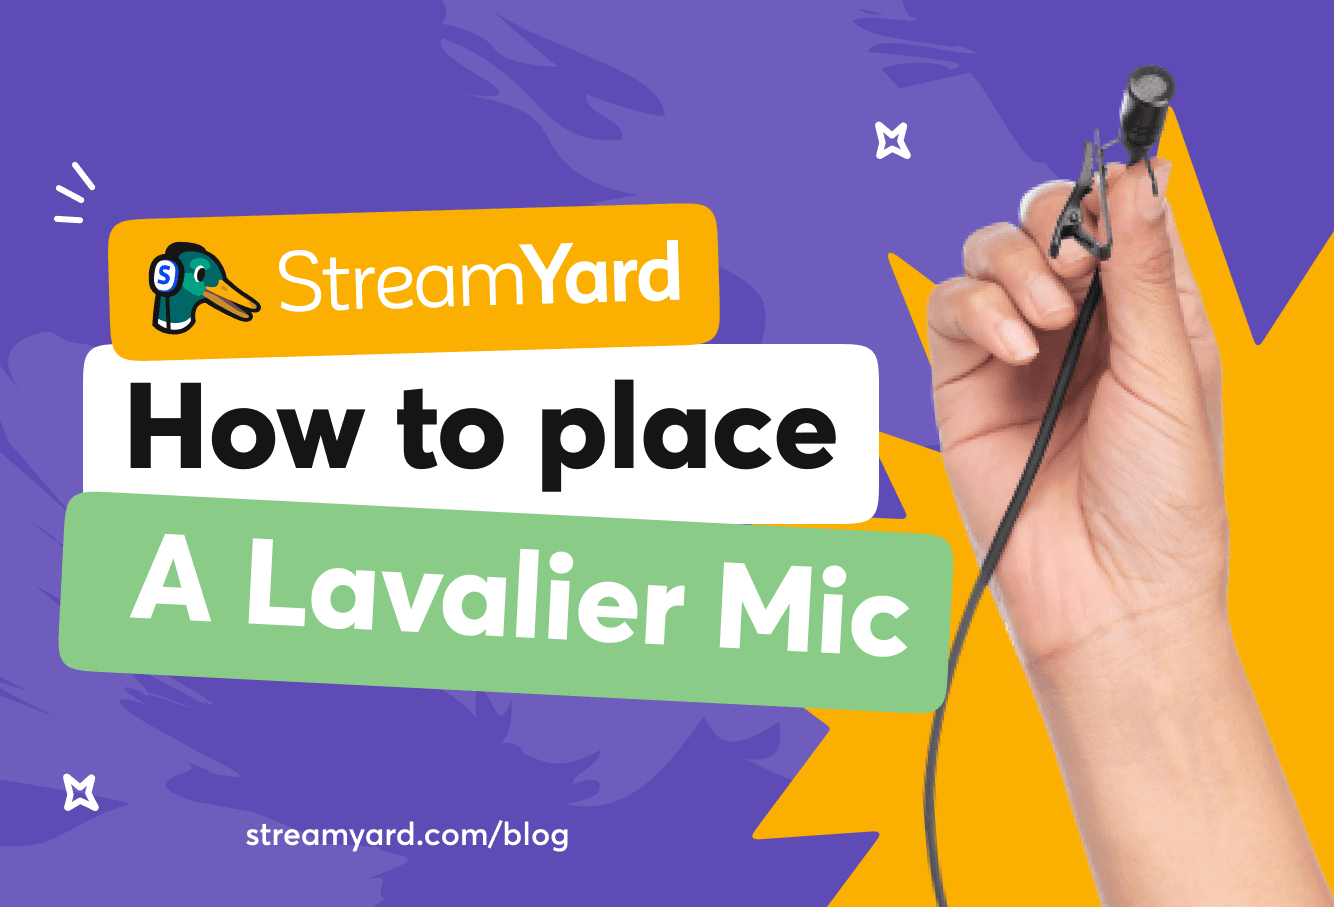 Learn how to place a lavalier mic. By positioning a lavalier microphone correctly, you can get optimal sound quality on your live streams.